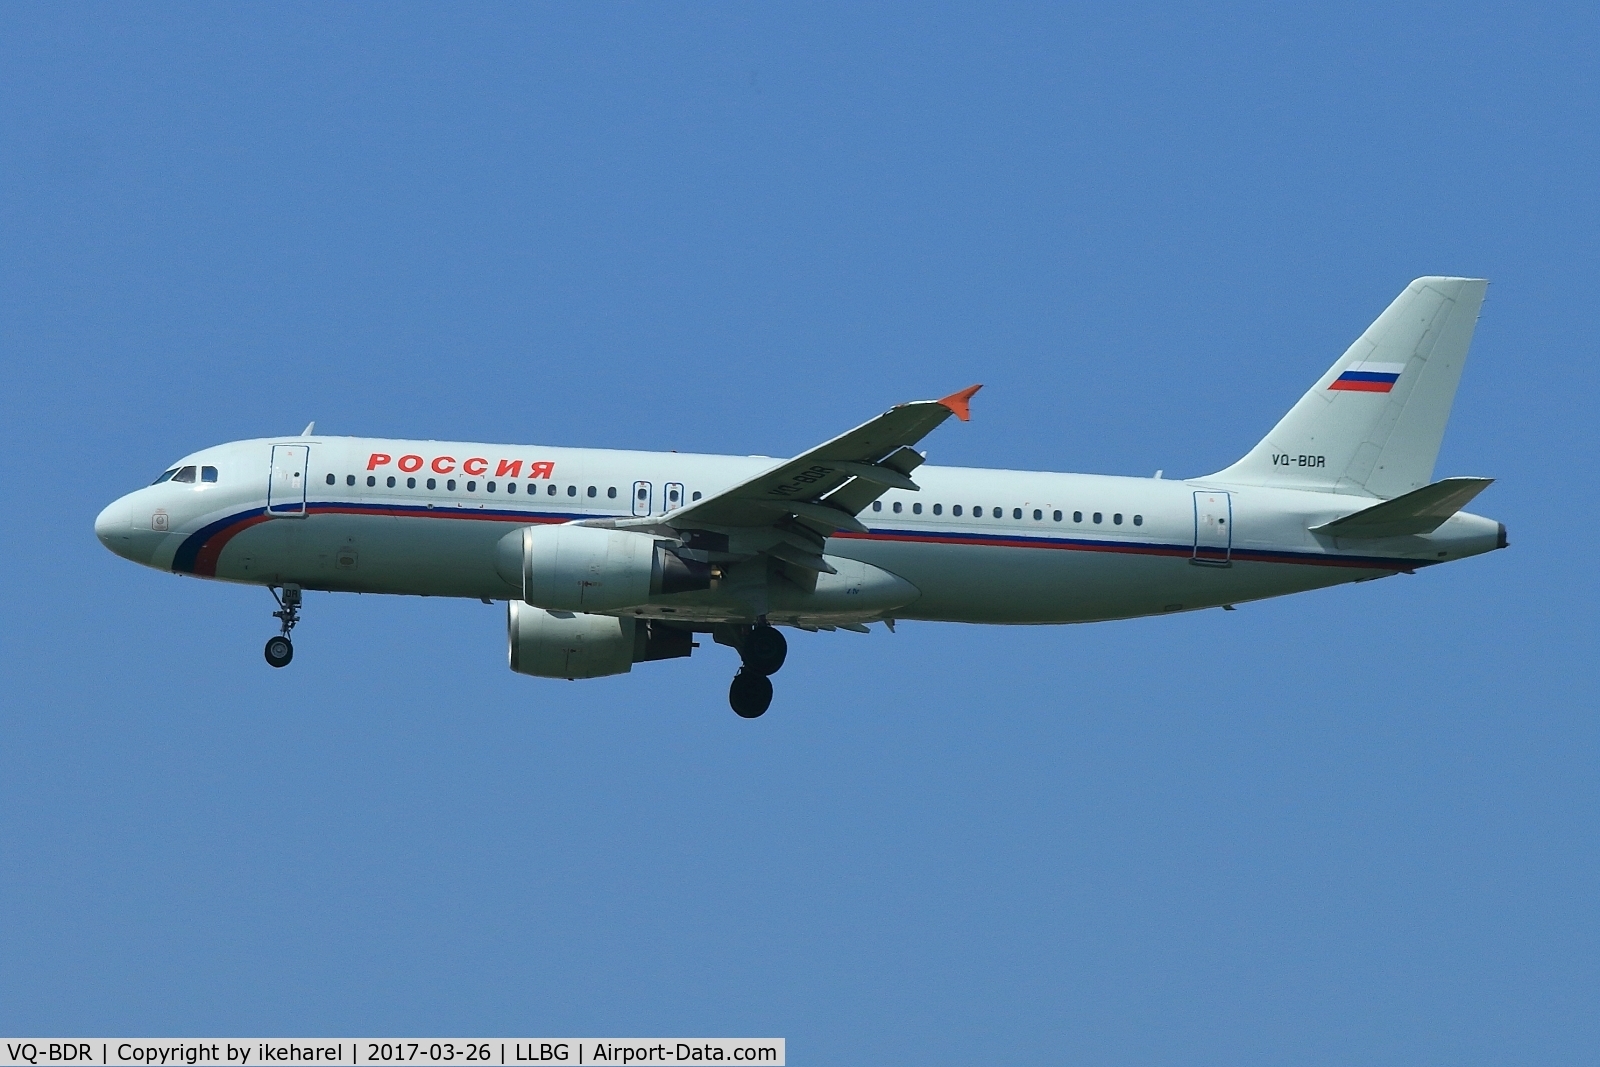 VQ-BDR, 1999 Airbus A320-214 C/N 1130, Flight from St.-Petersburg upon landing on runway 21.